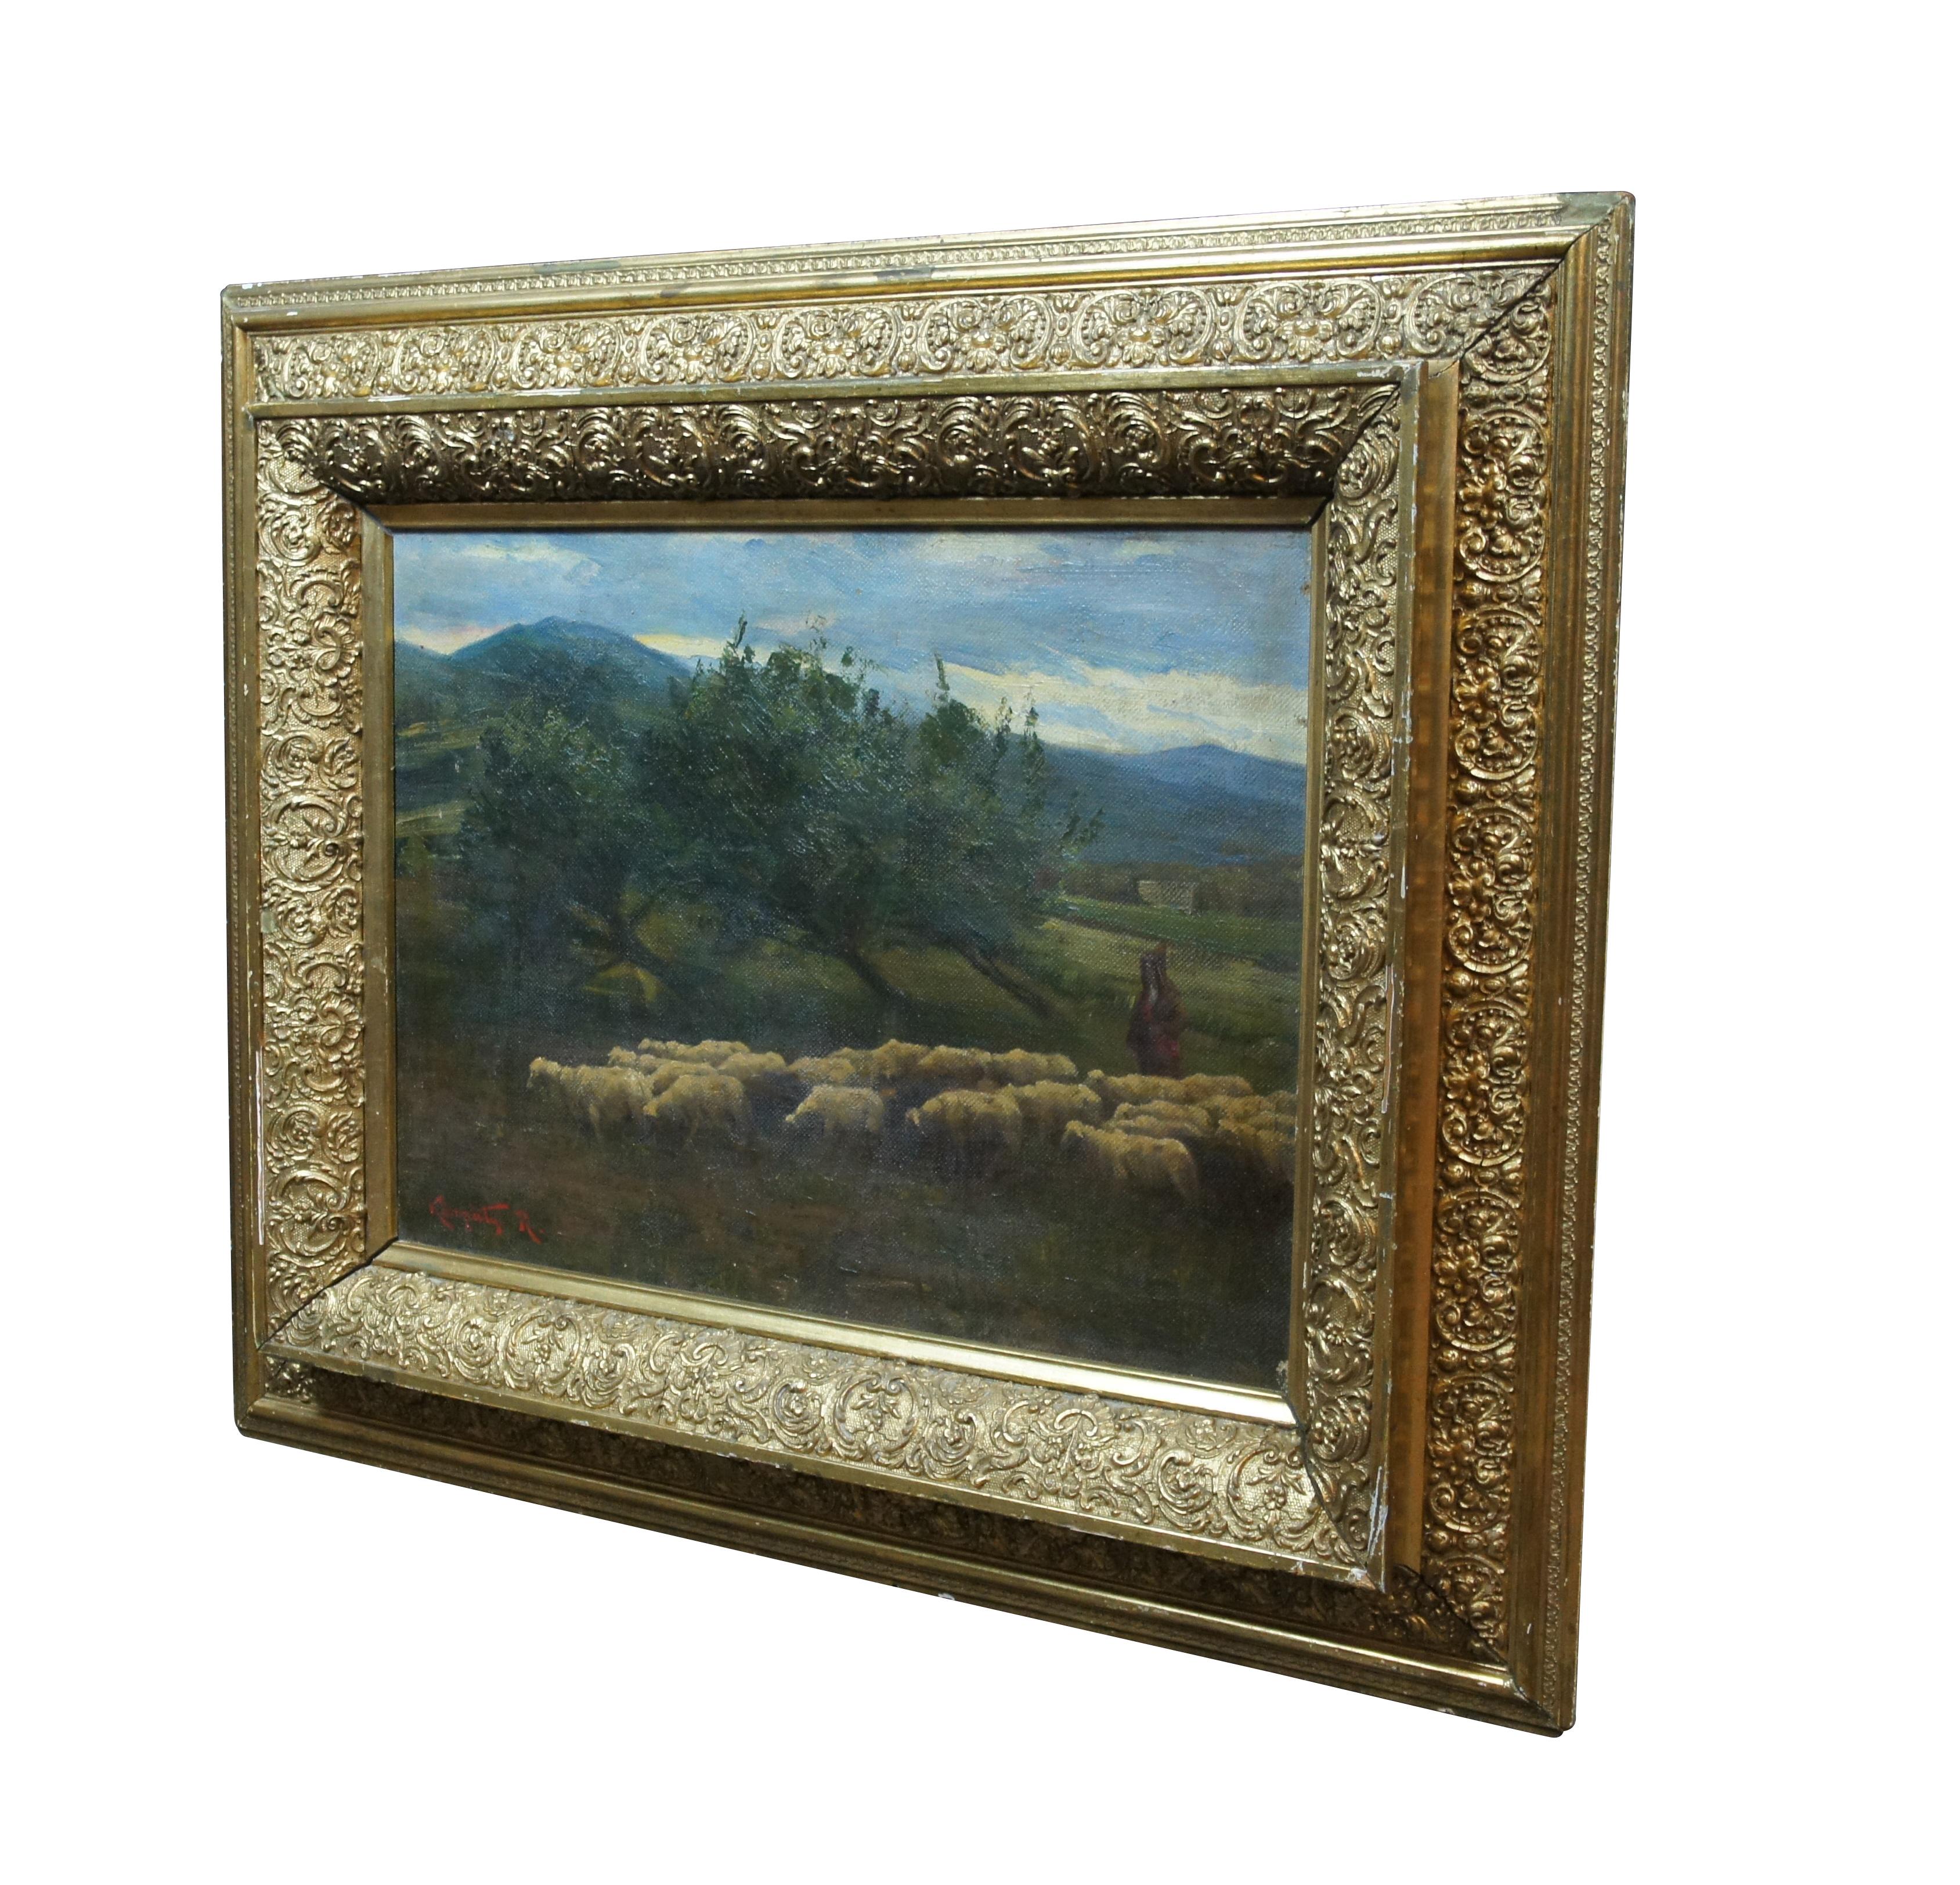 Late 19th-early 20th century oil on canvas painting by Rezső Kárpáty. Shows a picturesque mountain landscape, focused on a hooded shepherd and his flock, walking in front of a stand of trees. Double layered giltwood frame heavily carved with low